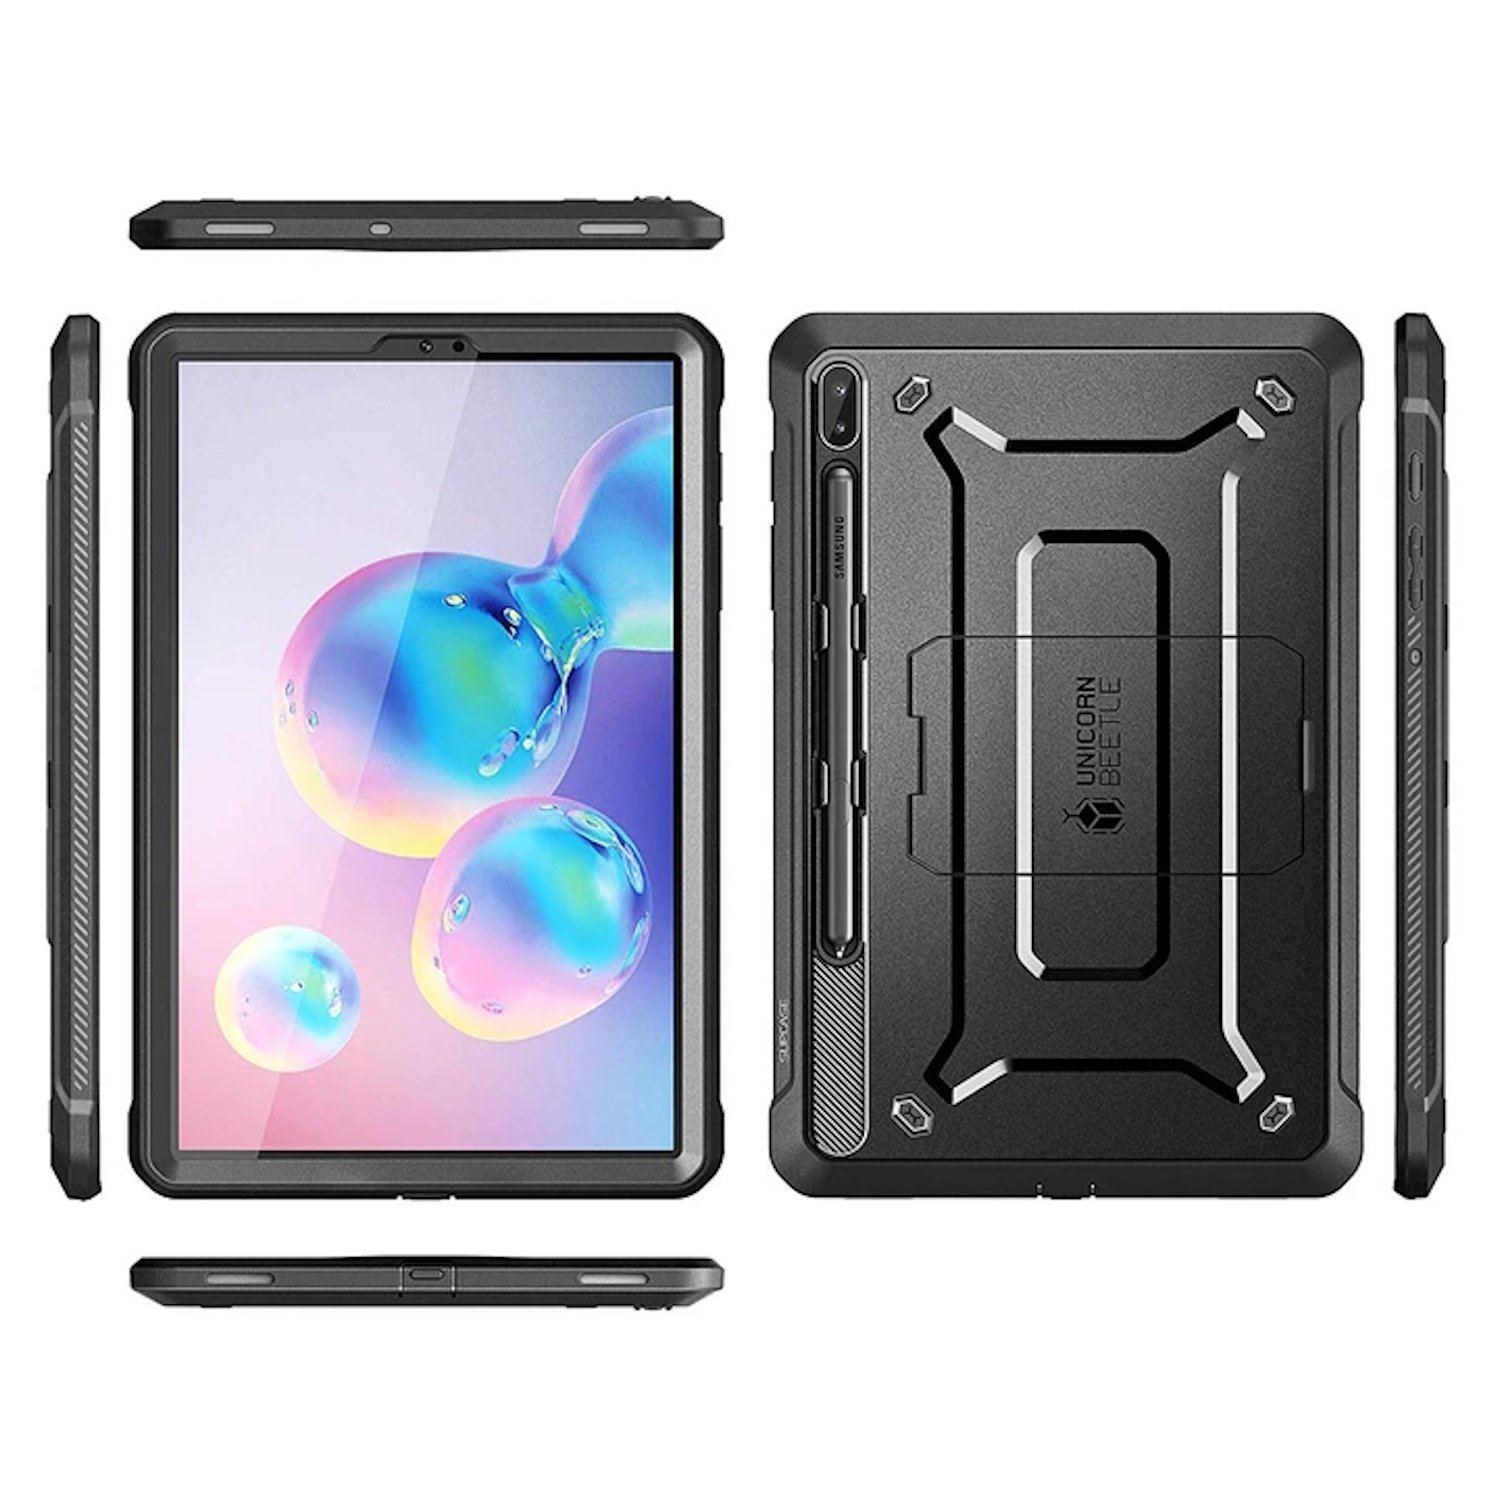 Supcase UB Pro Series Full-Body Rugged Case with Kickstand for Samsung Galaxy Tab S6(2019), Black Tab S6 Case Supcase 